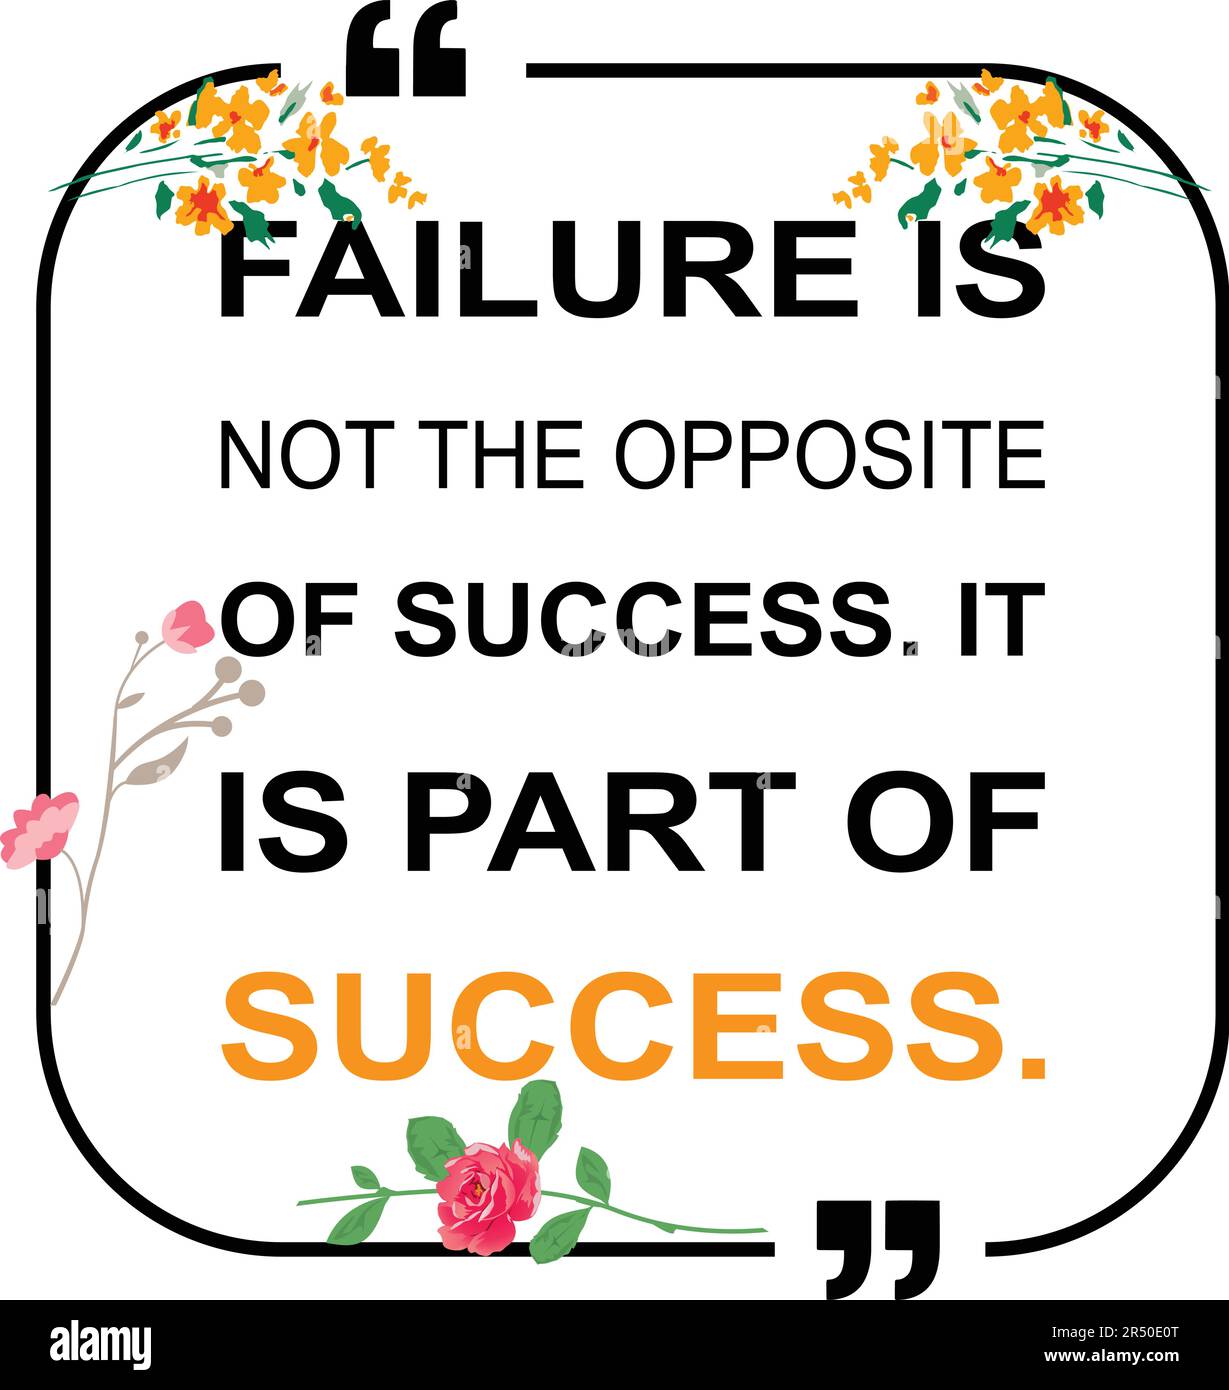 Motivational quotes, FAILURE IS NOT THE OPPOSITE OF SUCCESS. IT IS PART OF SUCCESS. inspirational quotes, positive quotes. Stock Vector